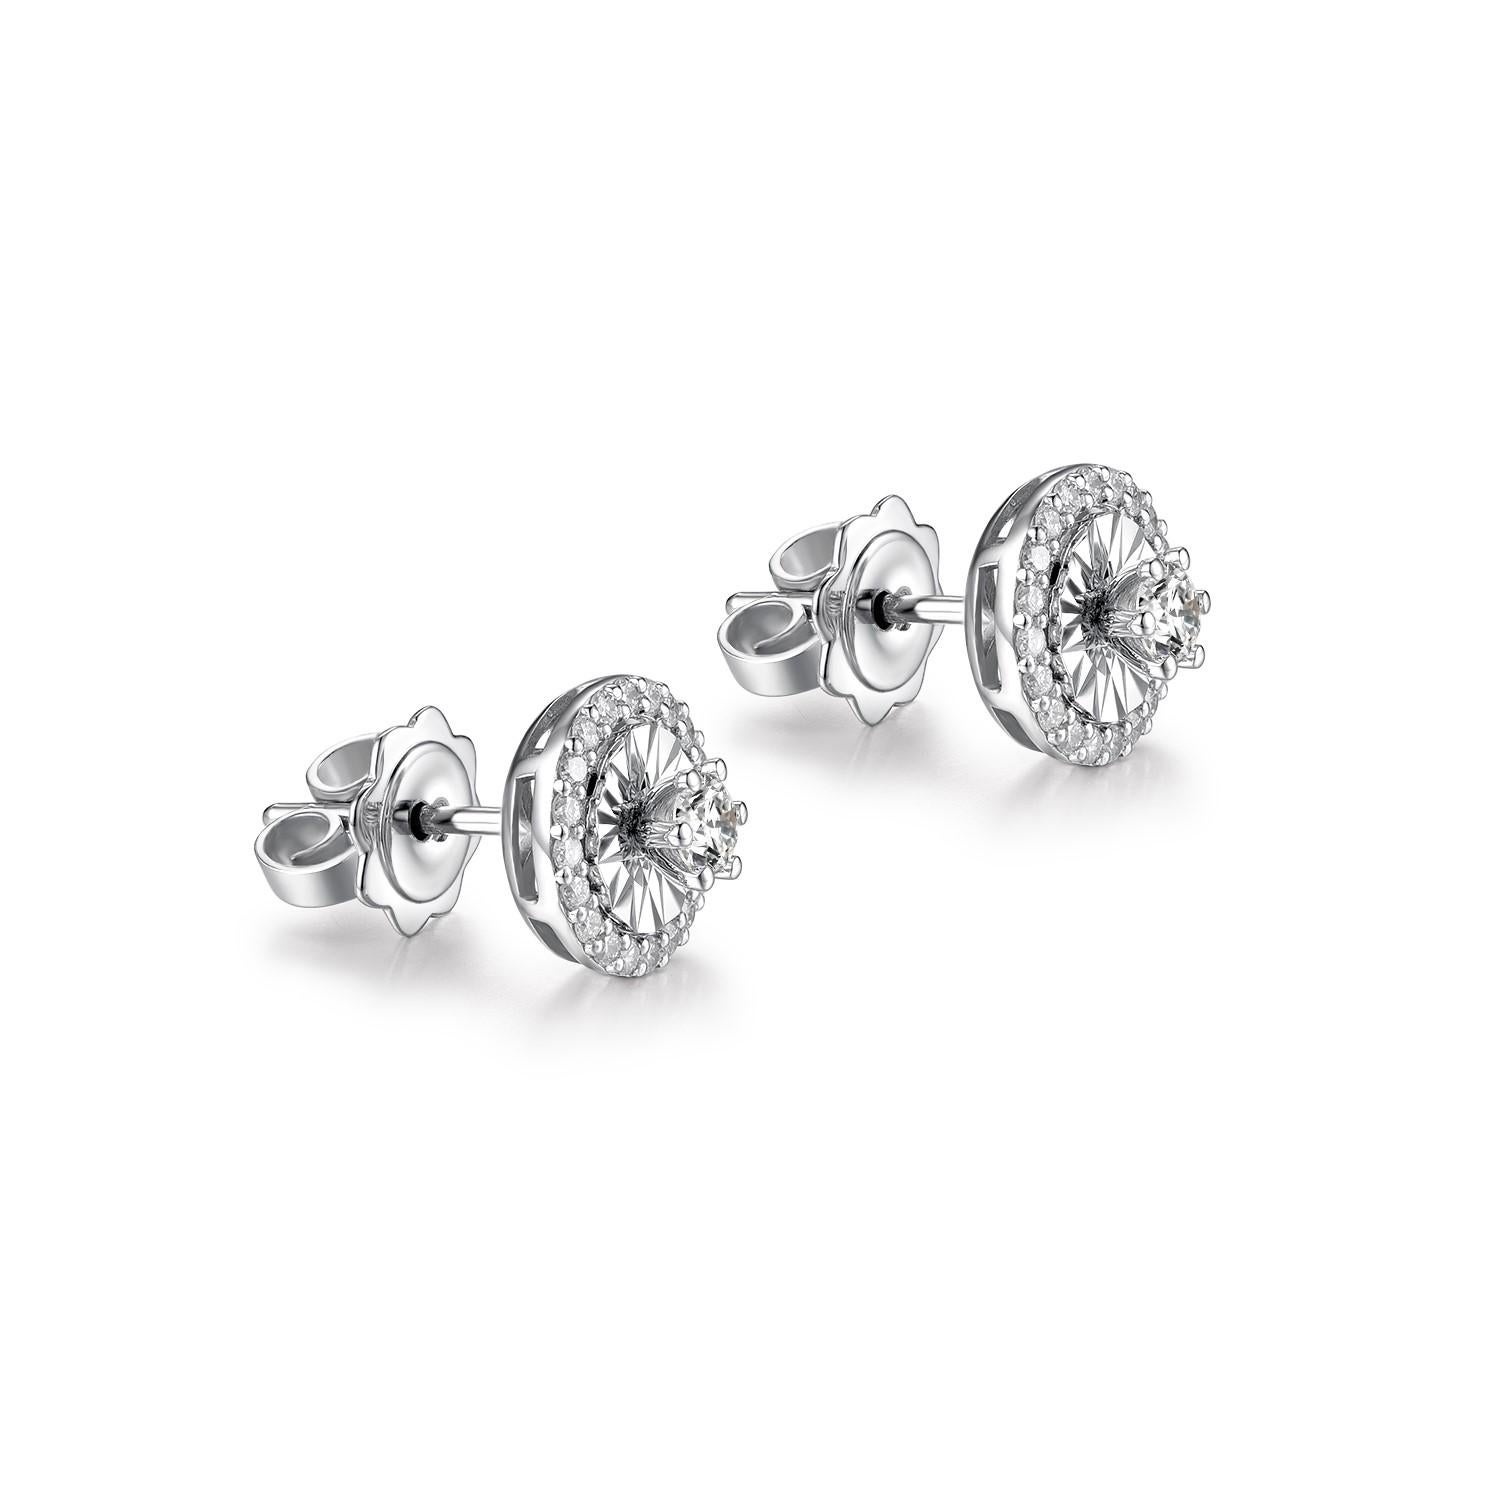 These diamond stud earrings are a classic piece of fine jewelry, featuring a central round-cut diamond encircled by a halo of smaller diamonds, set in 14K white gold. The main diamonds are prong-set, enhancing their natural brilliance. The